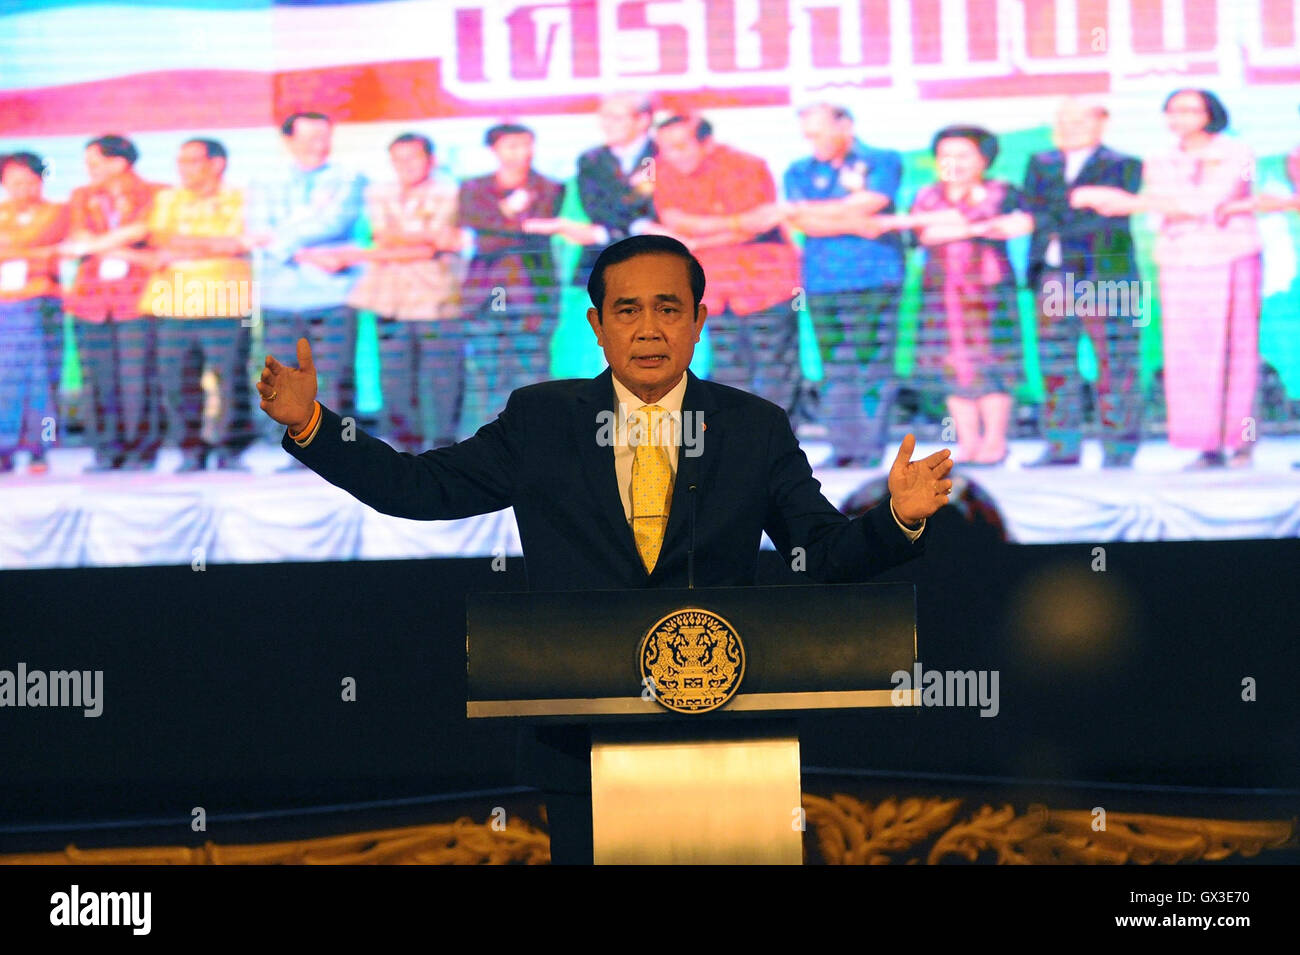 Bangkok, Thailand. 15th Sep, 2016. Thai Prime Minister Prayut Chan-o-cha speaks during a press conference on the performances of the government during the last two years, at the Thai Government House in Bangkok, capital of Thailand, on Sept. 15, 2016. Thailand could potentially upgrade itself from the long-standing status of a Third World developing country to a ''First World'' developed country, Thai Prime Minister Prayut Chan-o-cha said on Thursday. © Rachen Sageamsak/Xinhua/Alamy Live News Stock Photo